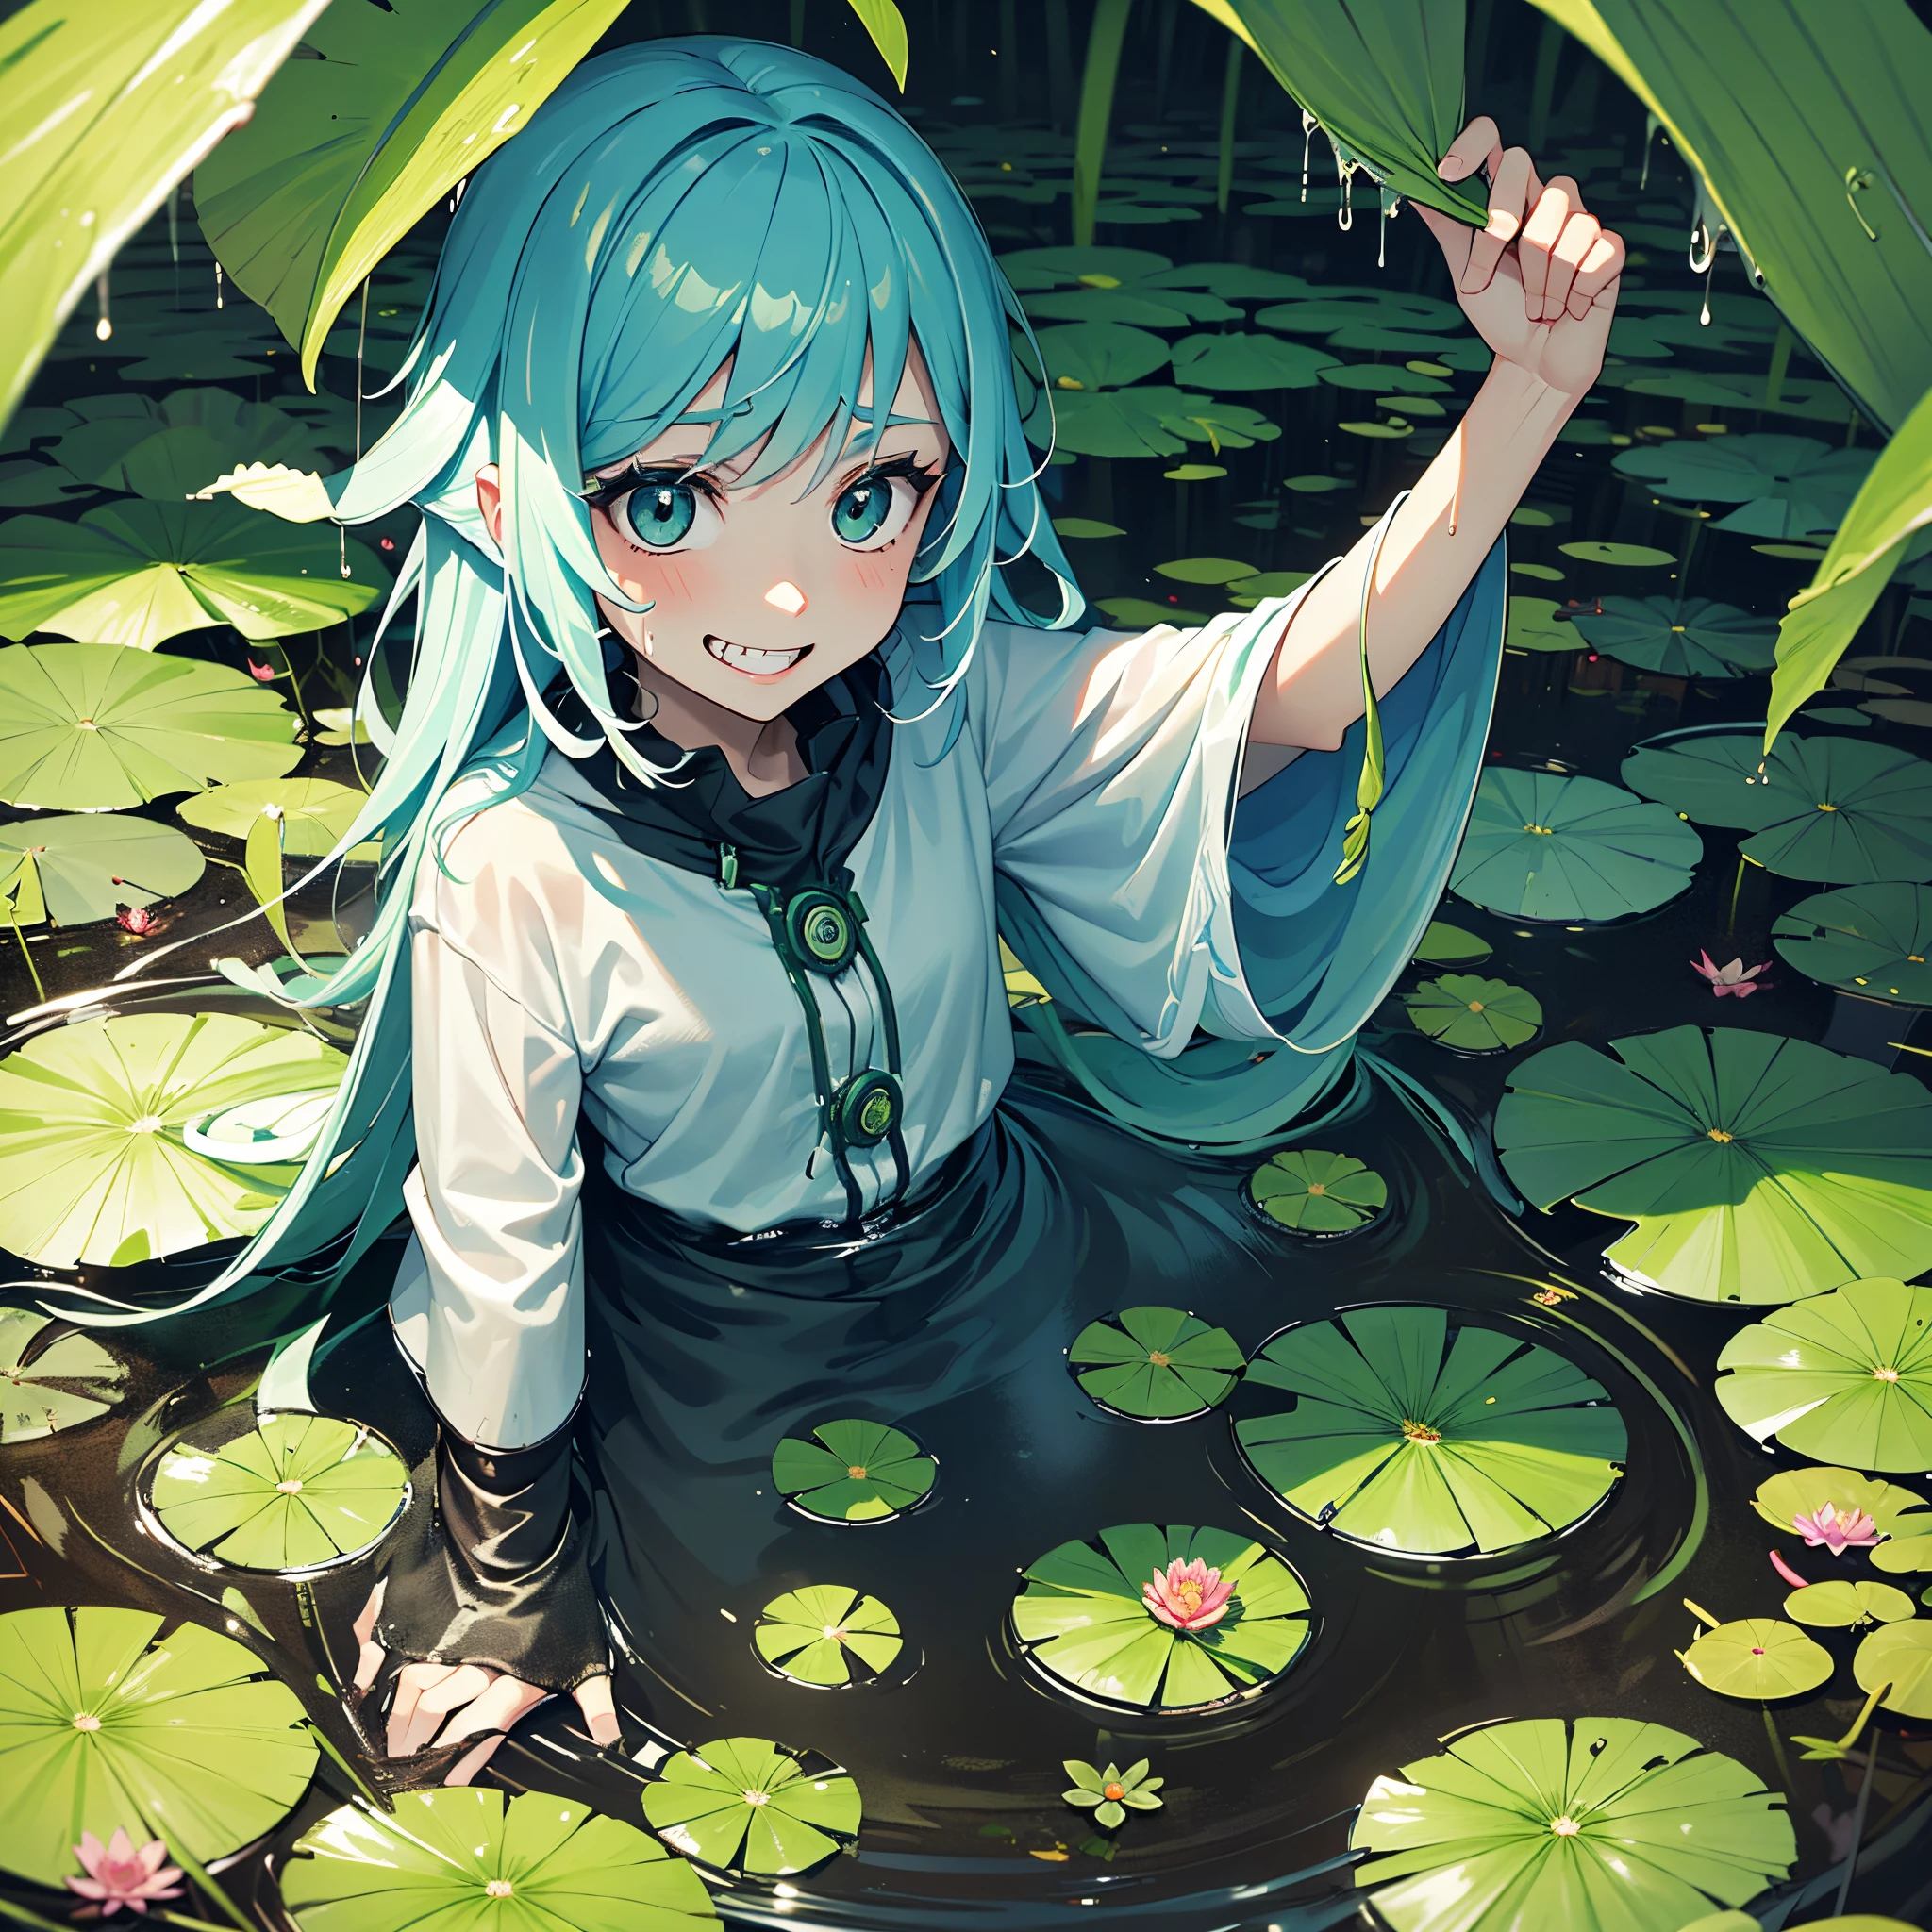 girl coming out of the swamp. she drips mucus. Jagged teeth. Grinning. Lots of water lilies.